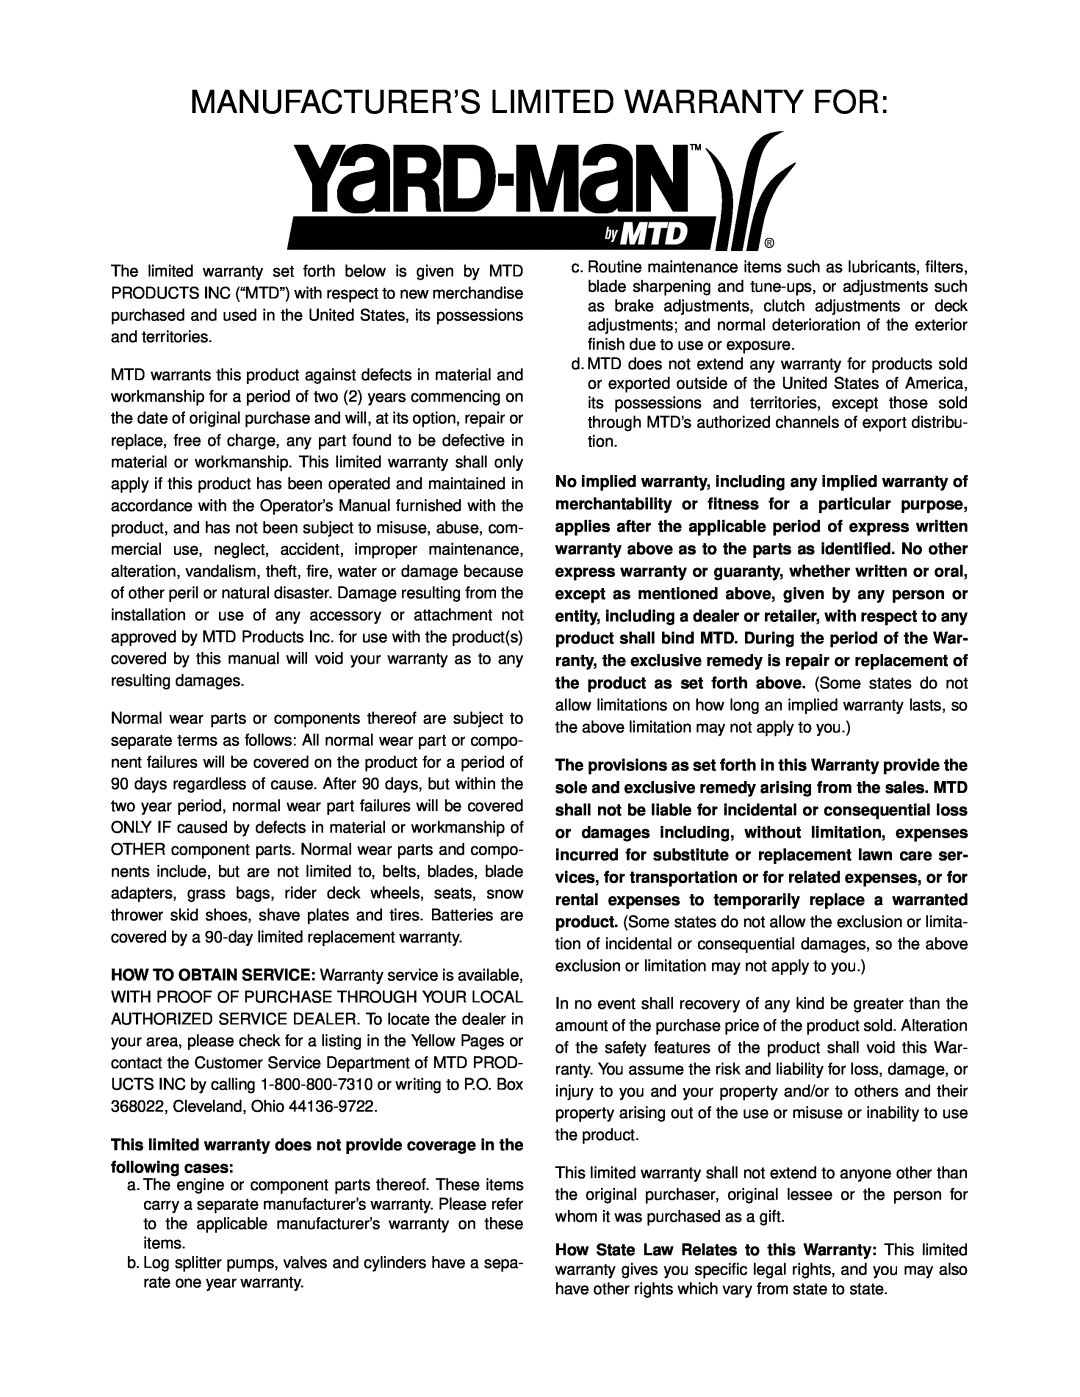 Yard-Man 11A-589C401 manual Manufacturer’S Limited Warranty For 